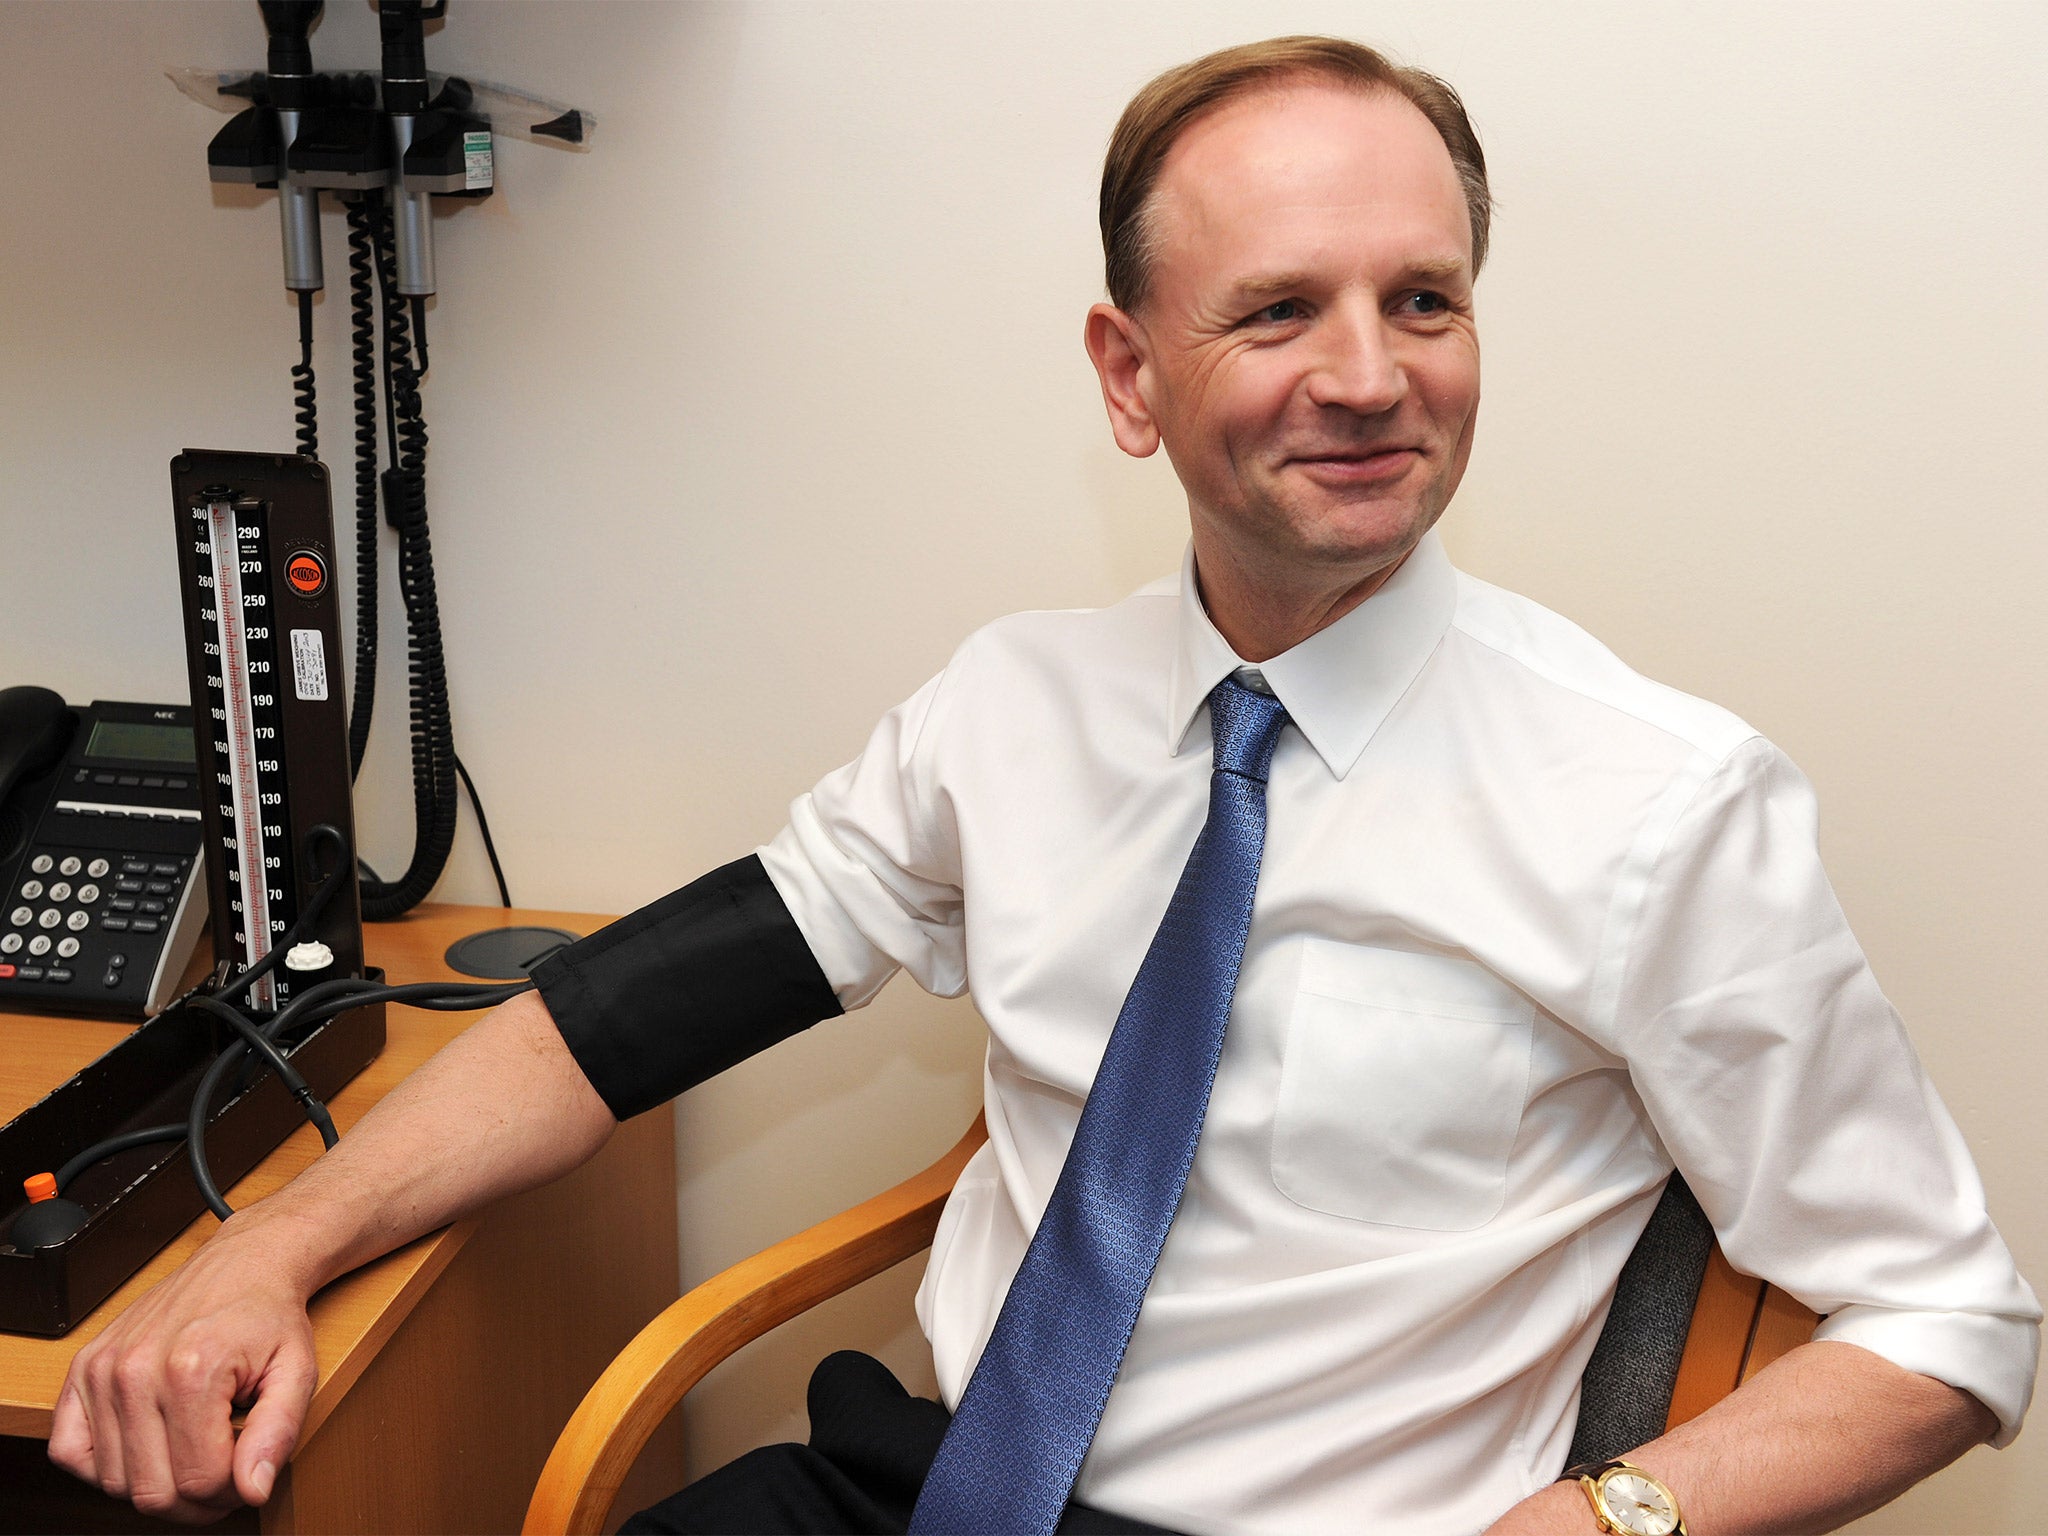 Simon Stevens, chief executive of NHS, has unveiled the first tranche of his five-year reform plan